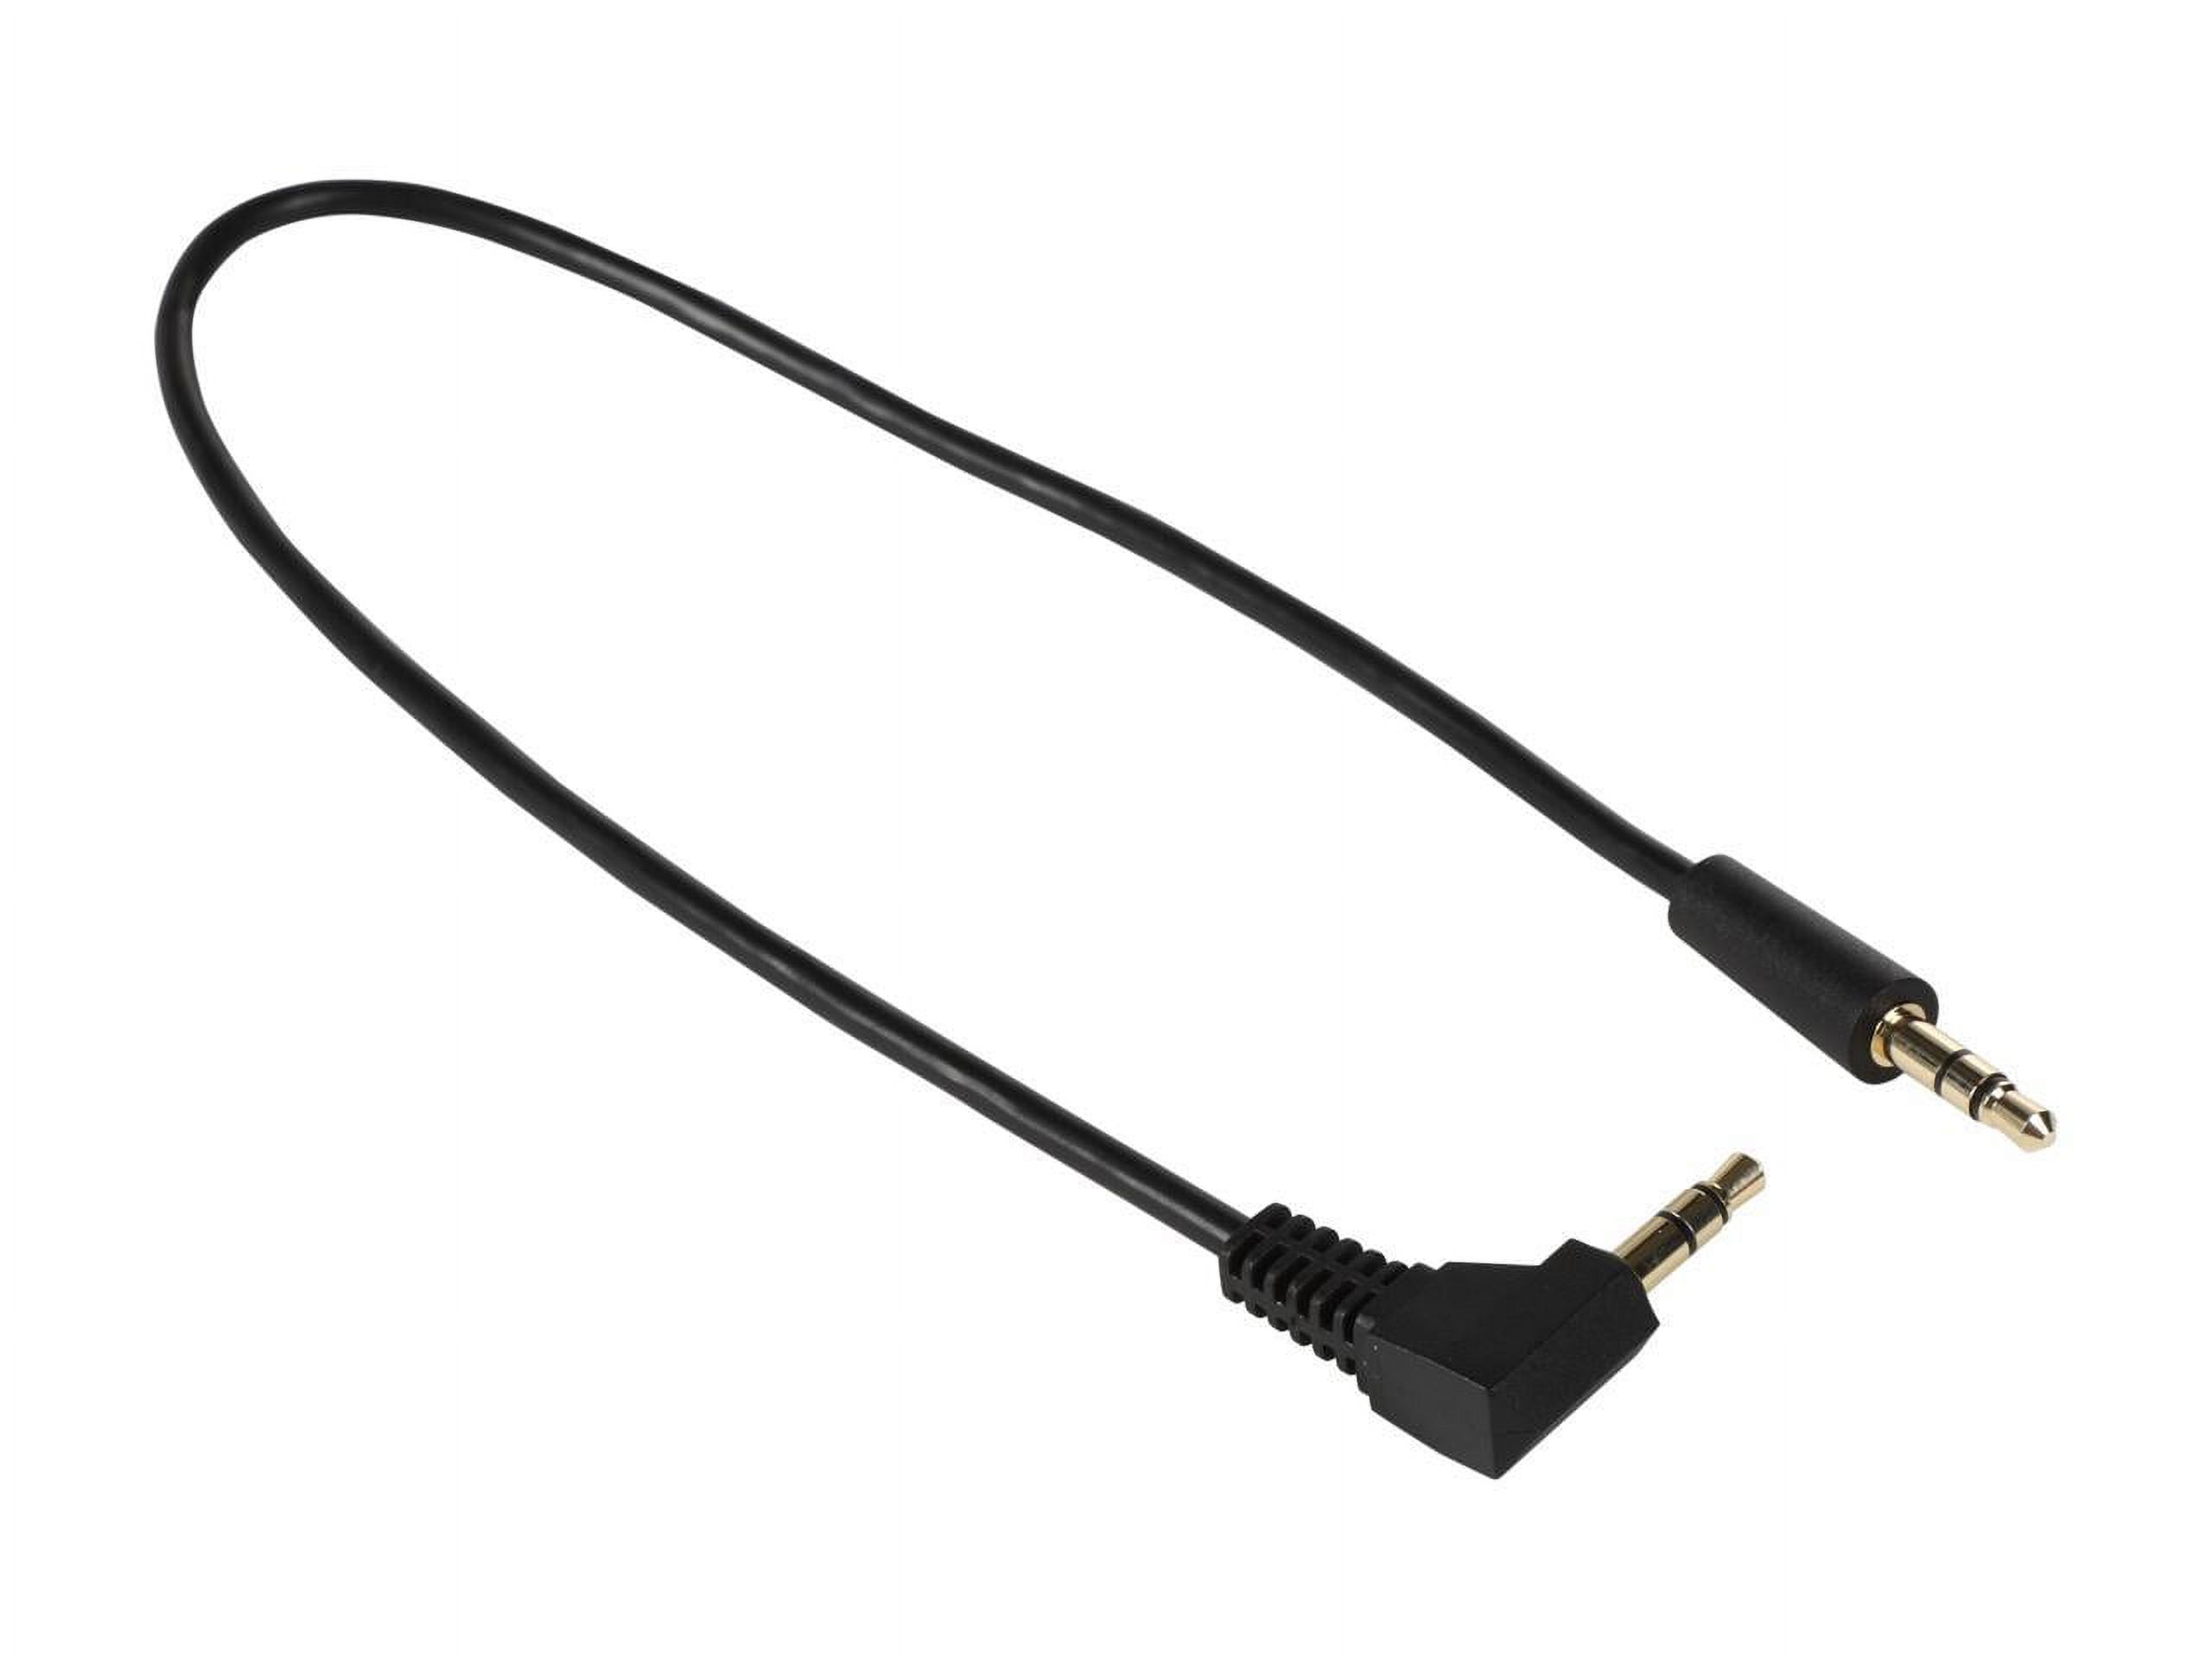 Tripp Lite P312-001-RA 1 Foot 3.5mm Mini Stereo Audio Cable with one Right Angle plug (M/M) - image 2 of 4